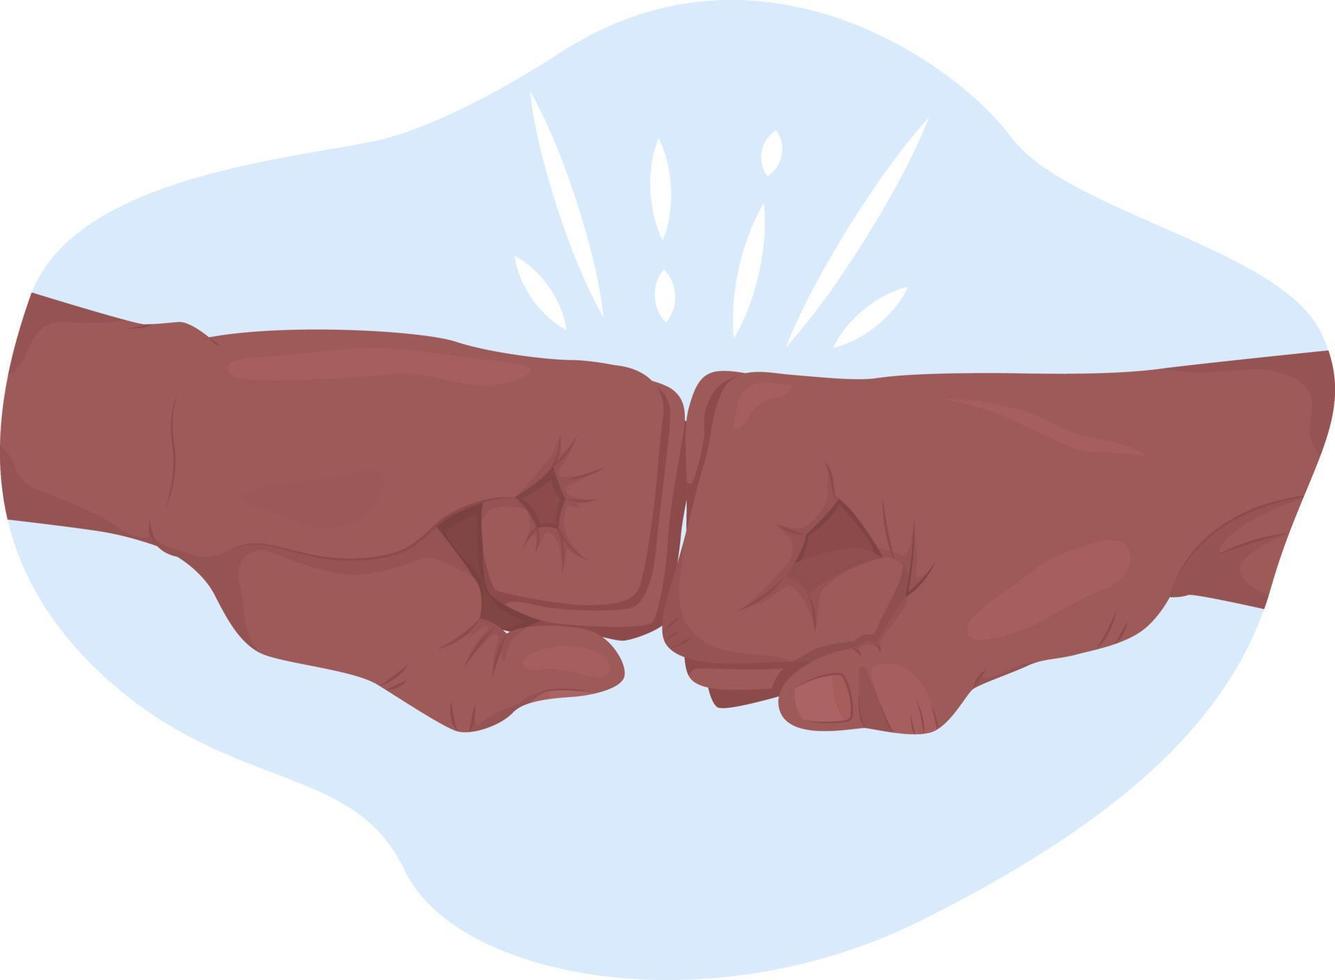 Fist bump 2D vector isolated illustration. Companionship flat hand gesture on cartoon background. Congratulation and celebration colourful editable scene for mobile, website, presentation